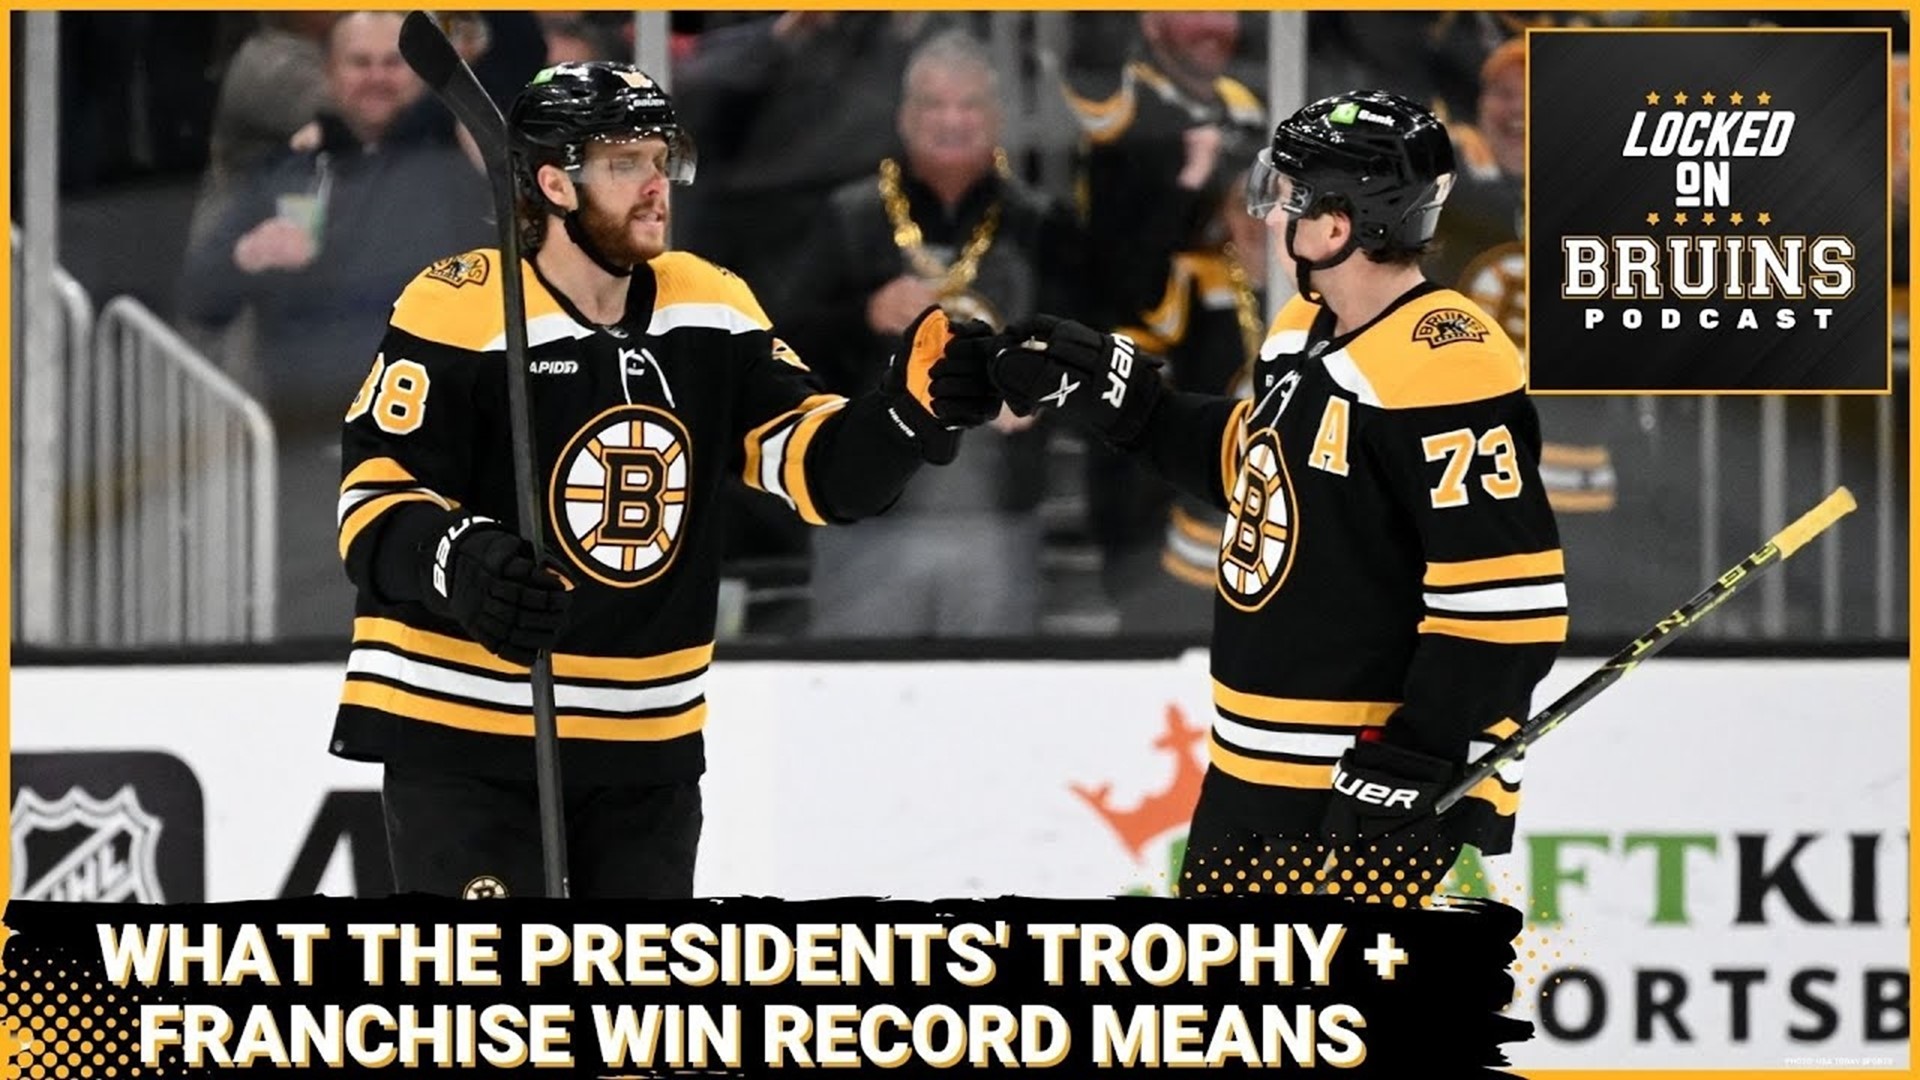 The Boston Bruins somehow needed overtime to beat the Columbus Blue Jackets on Thursday, but it resulted in clinching the Presidents' Trophy.